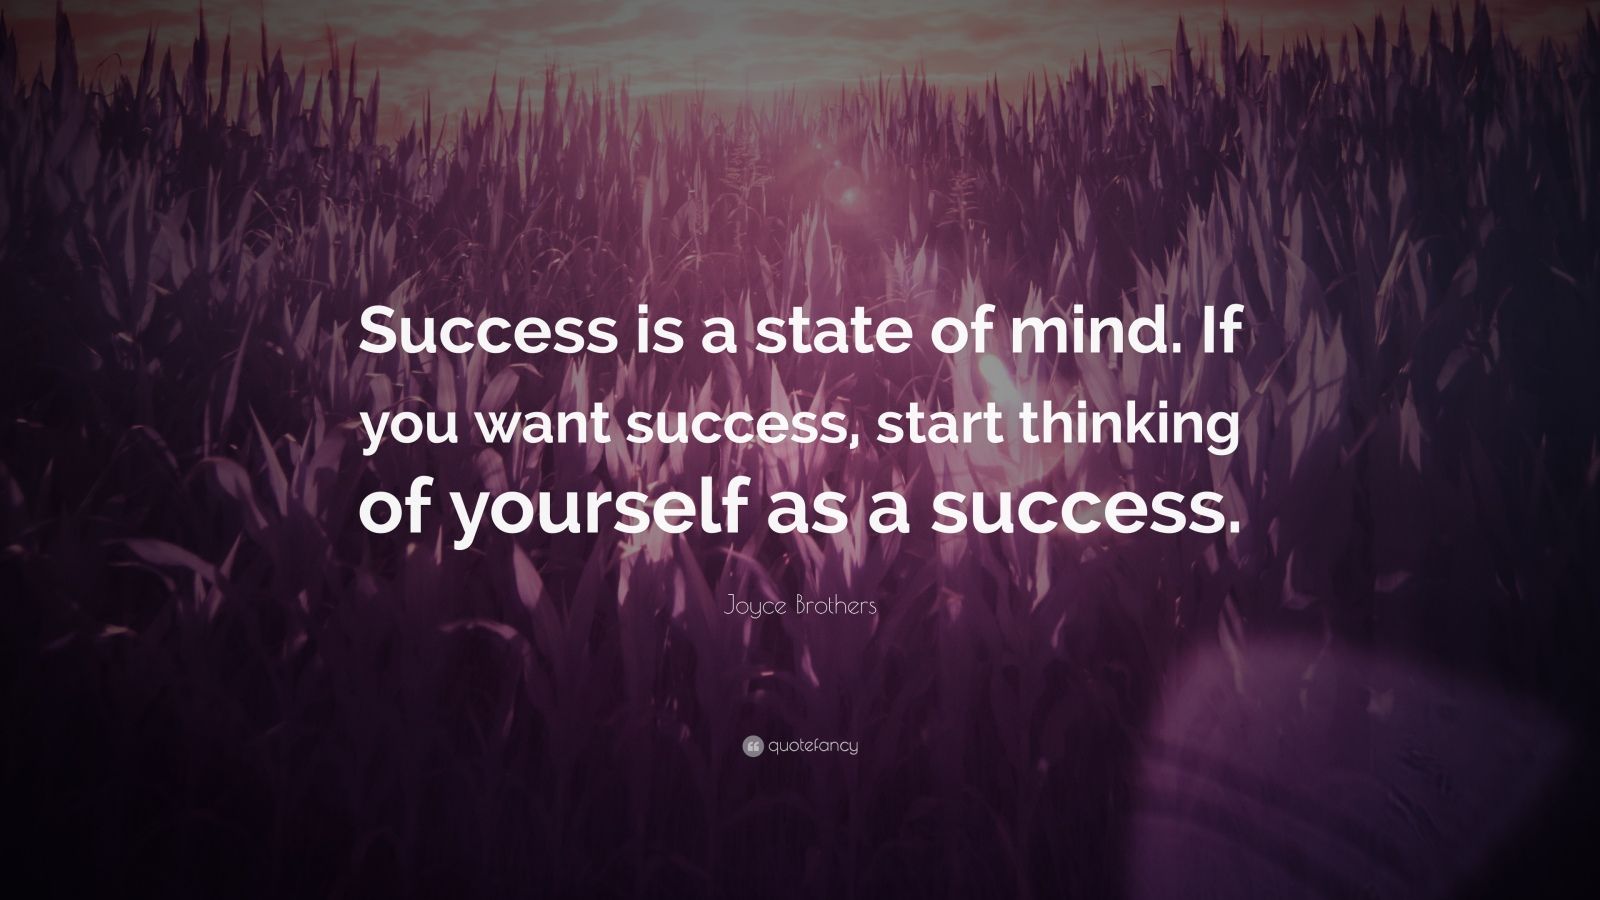 Joyce Brothers Quote: “Success is a state of mind. If you want success ...